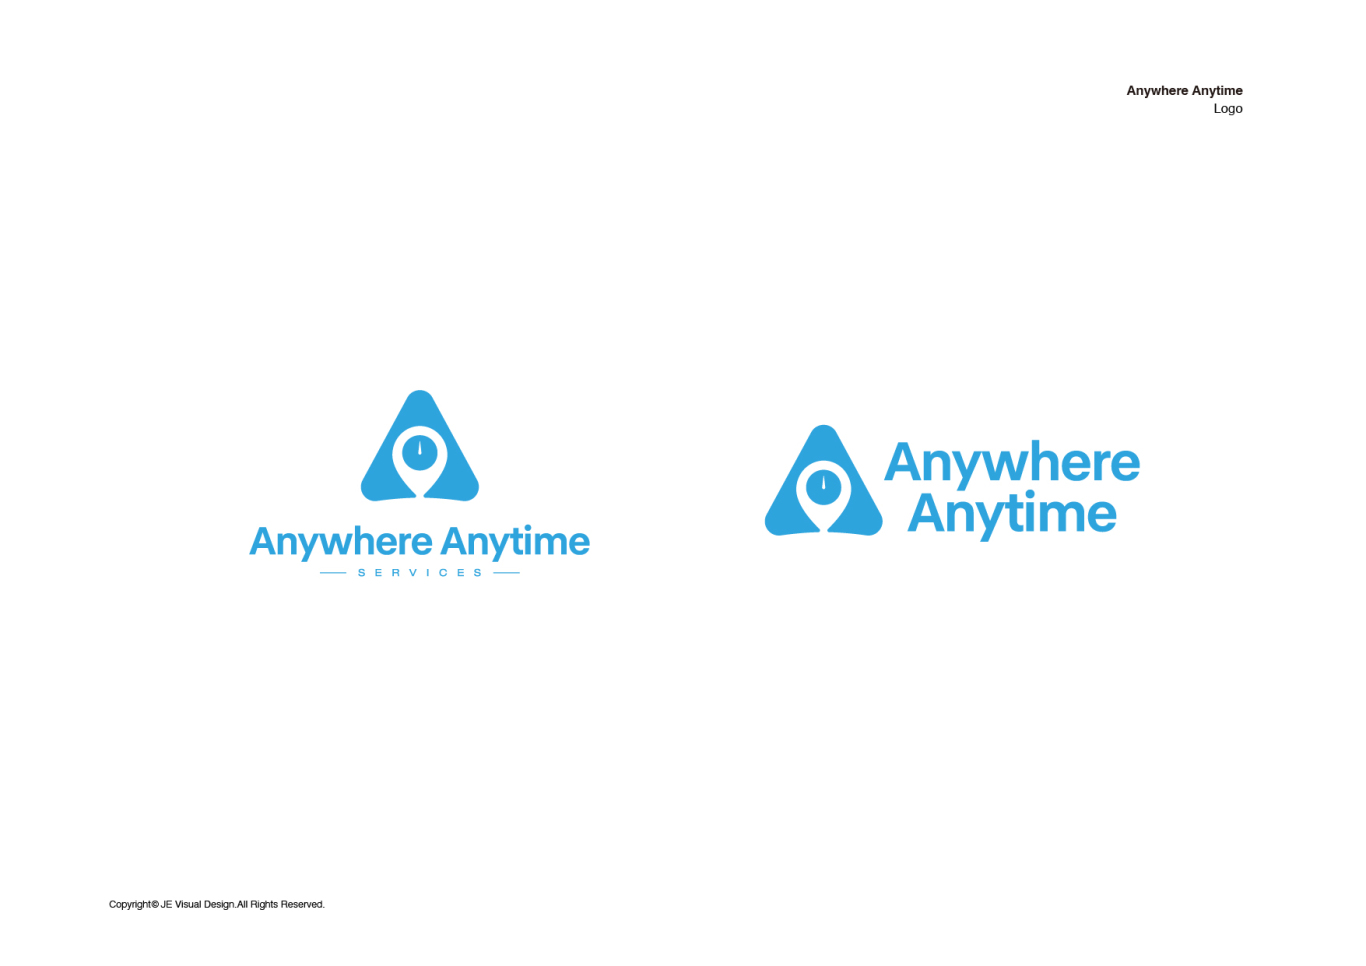 Anywhere Anytime logo设计图8